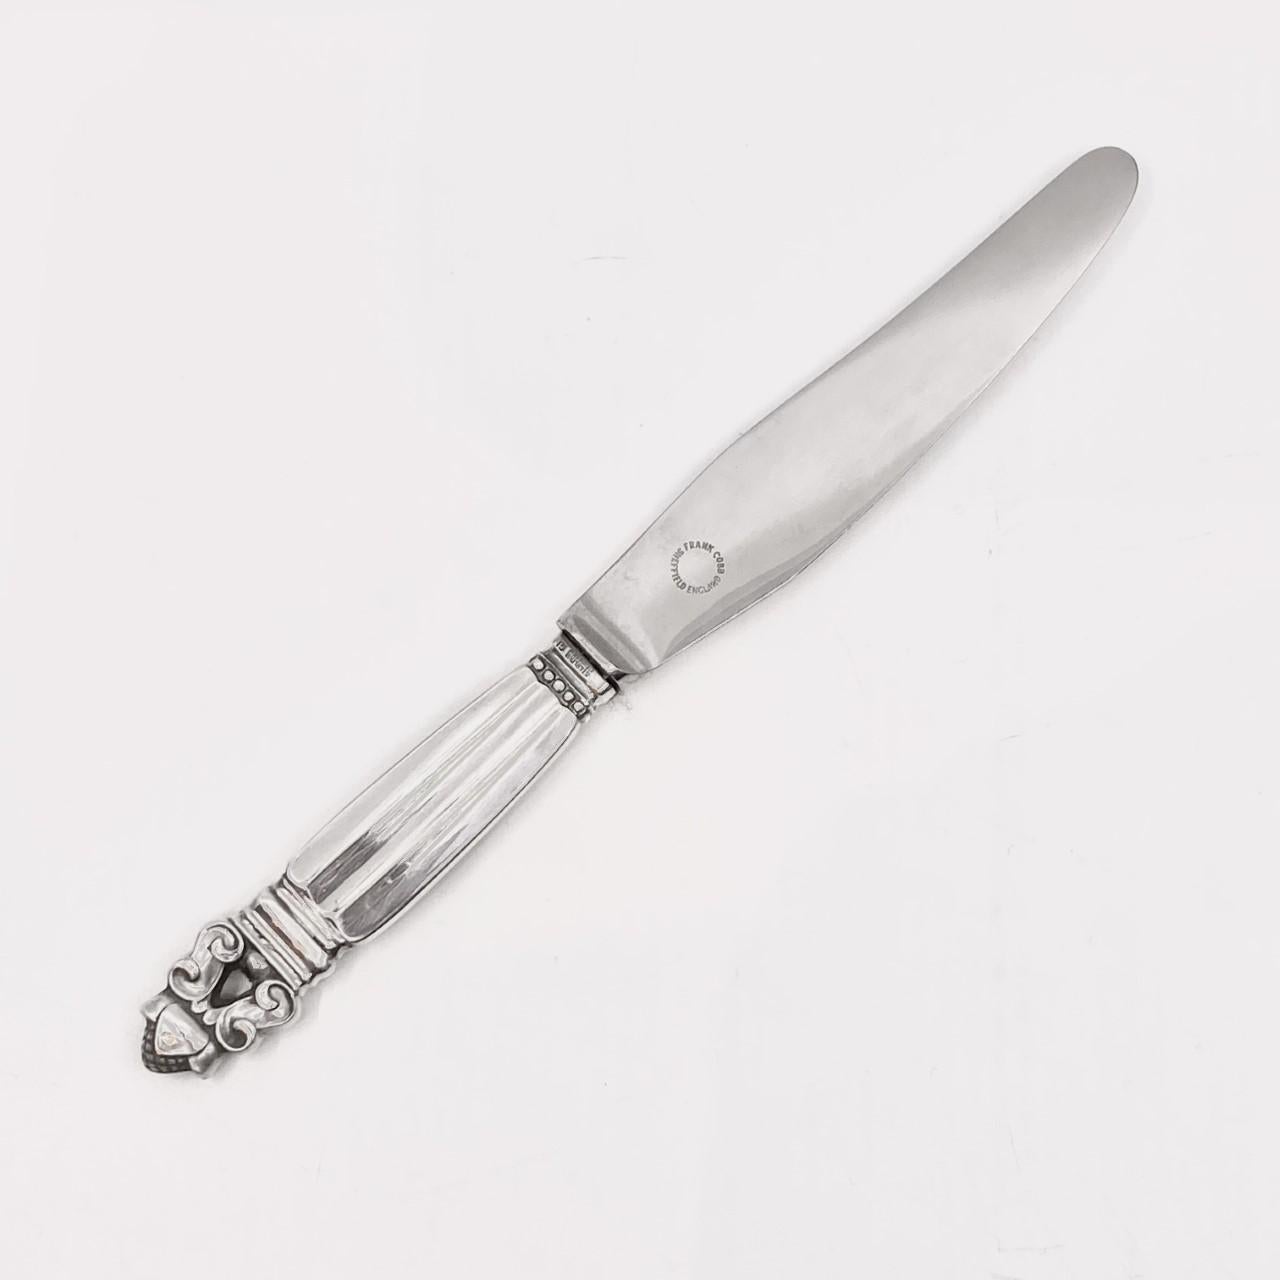 Vintage Georg Jensen short handle luncheon knife, sterling silver handle and stainless steel blade, item #023 in the Acorn pattern, design #62 by Johan Rohde from 1915.

Additional information:
Material: Sterling silver, stainless steel
Styles: Art